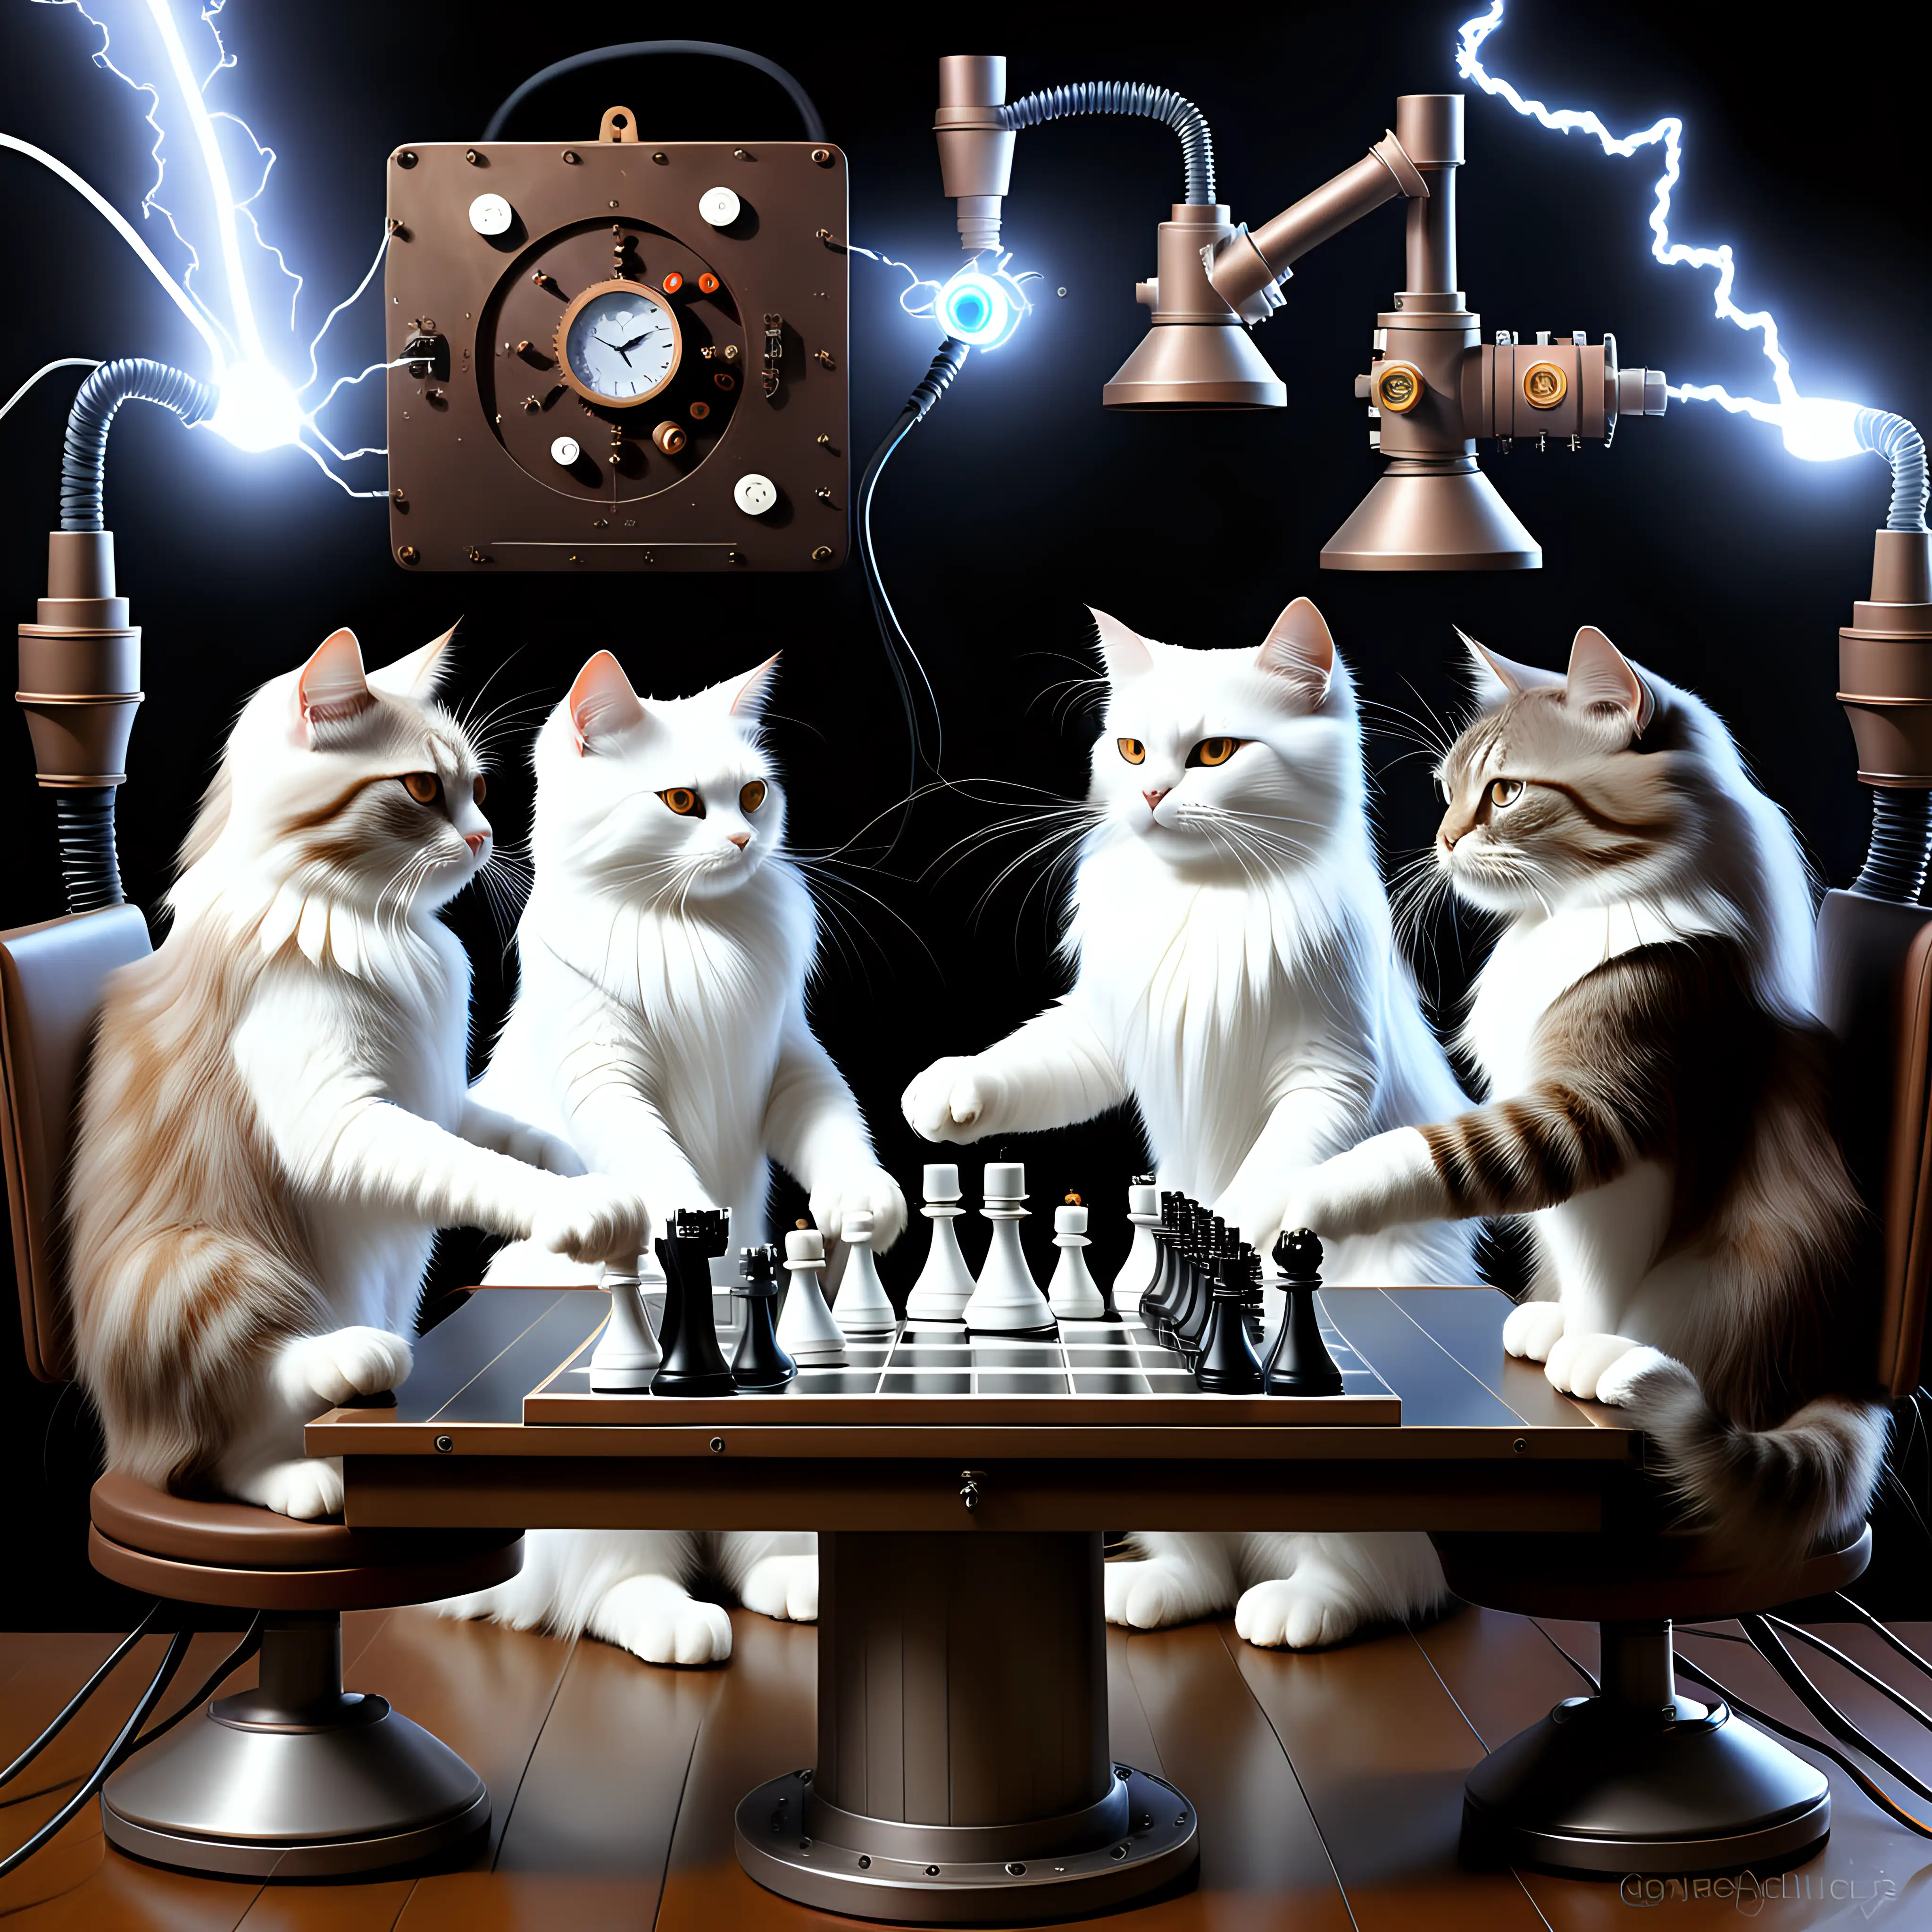 Surreal Steampunk Cats Playing Chess in an Electric Laboratory